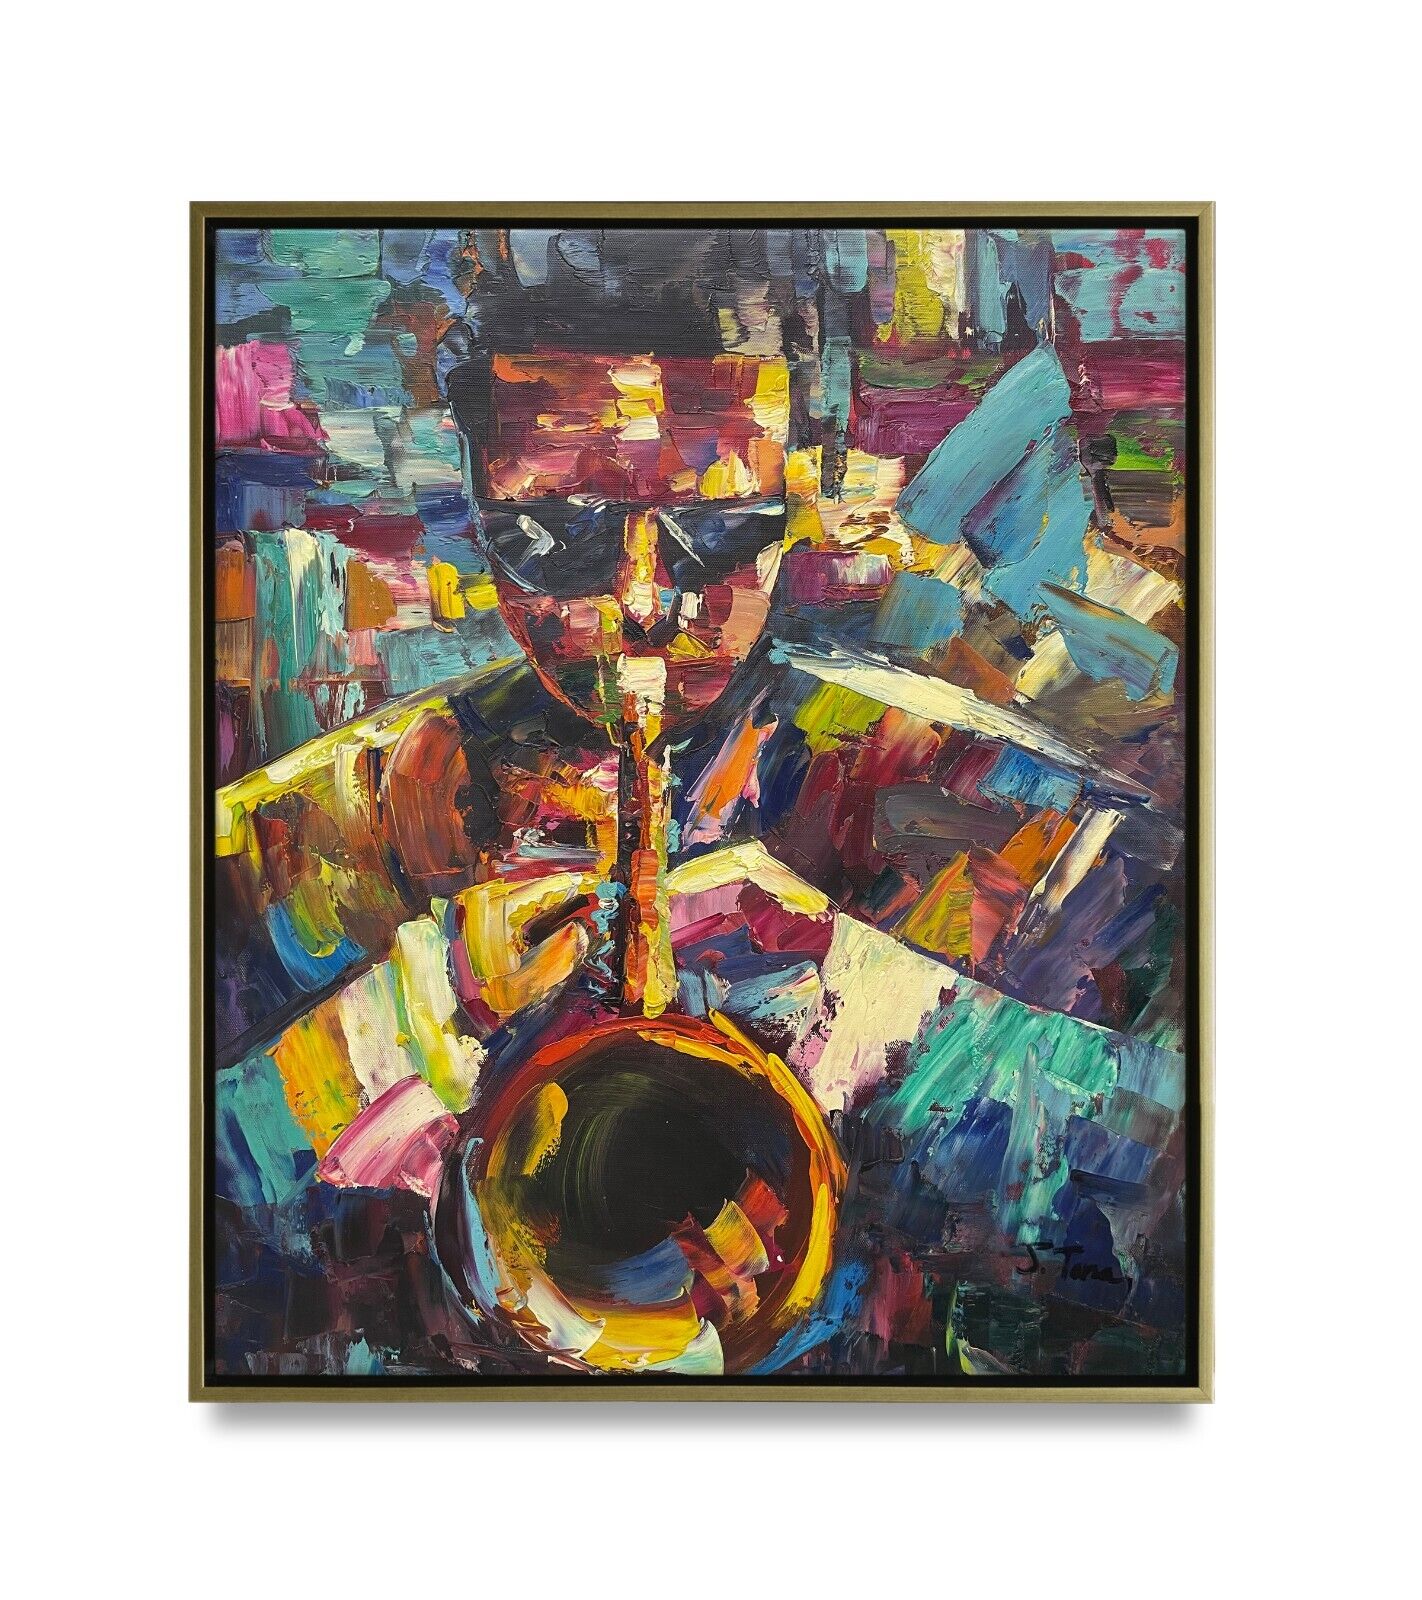 Hungryartist -Original Painting of Abstract Musician on Canvas 20x24 Framed